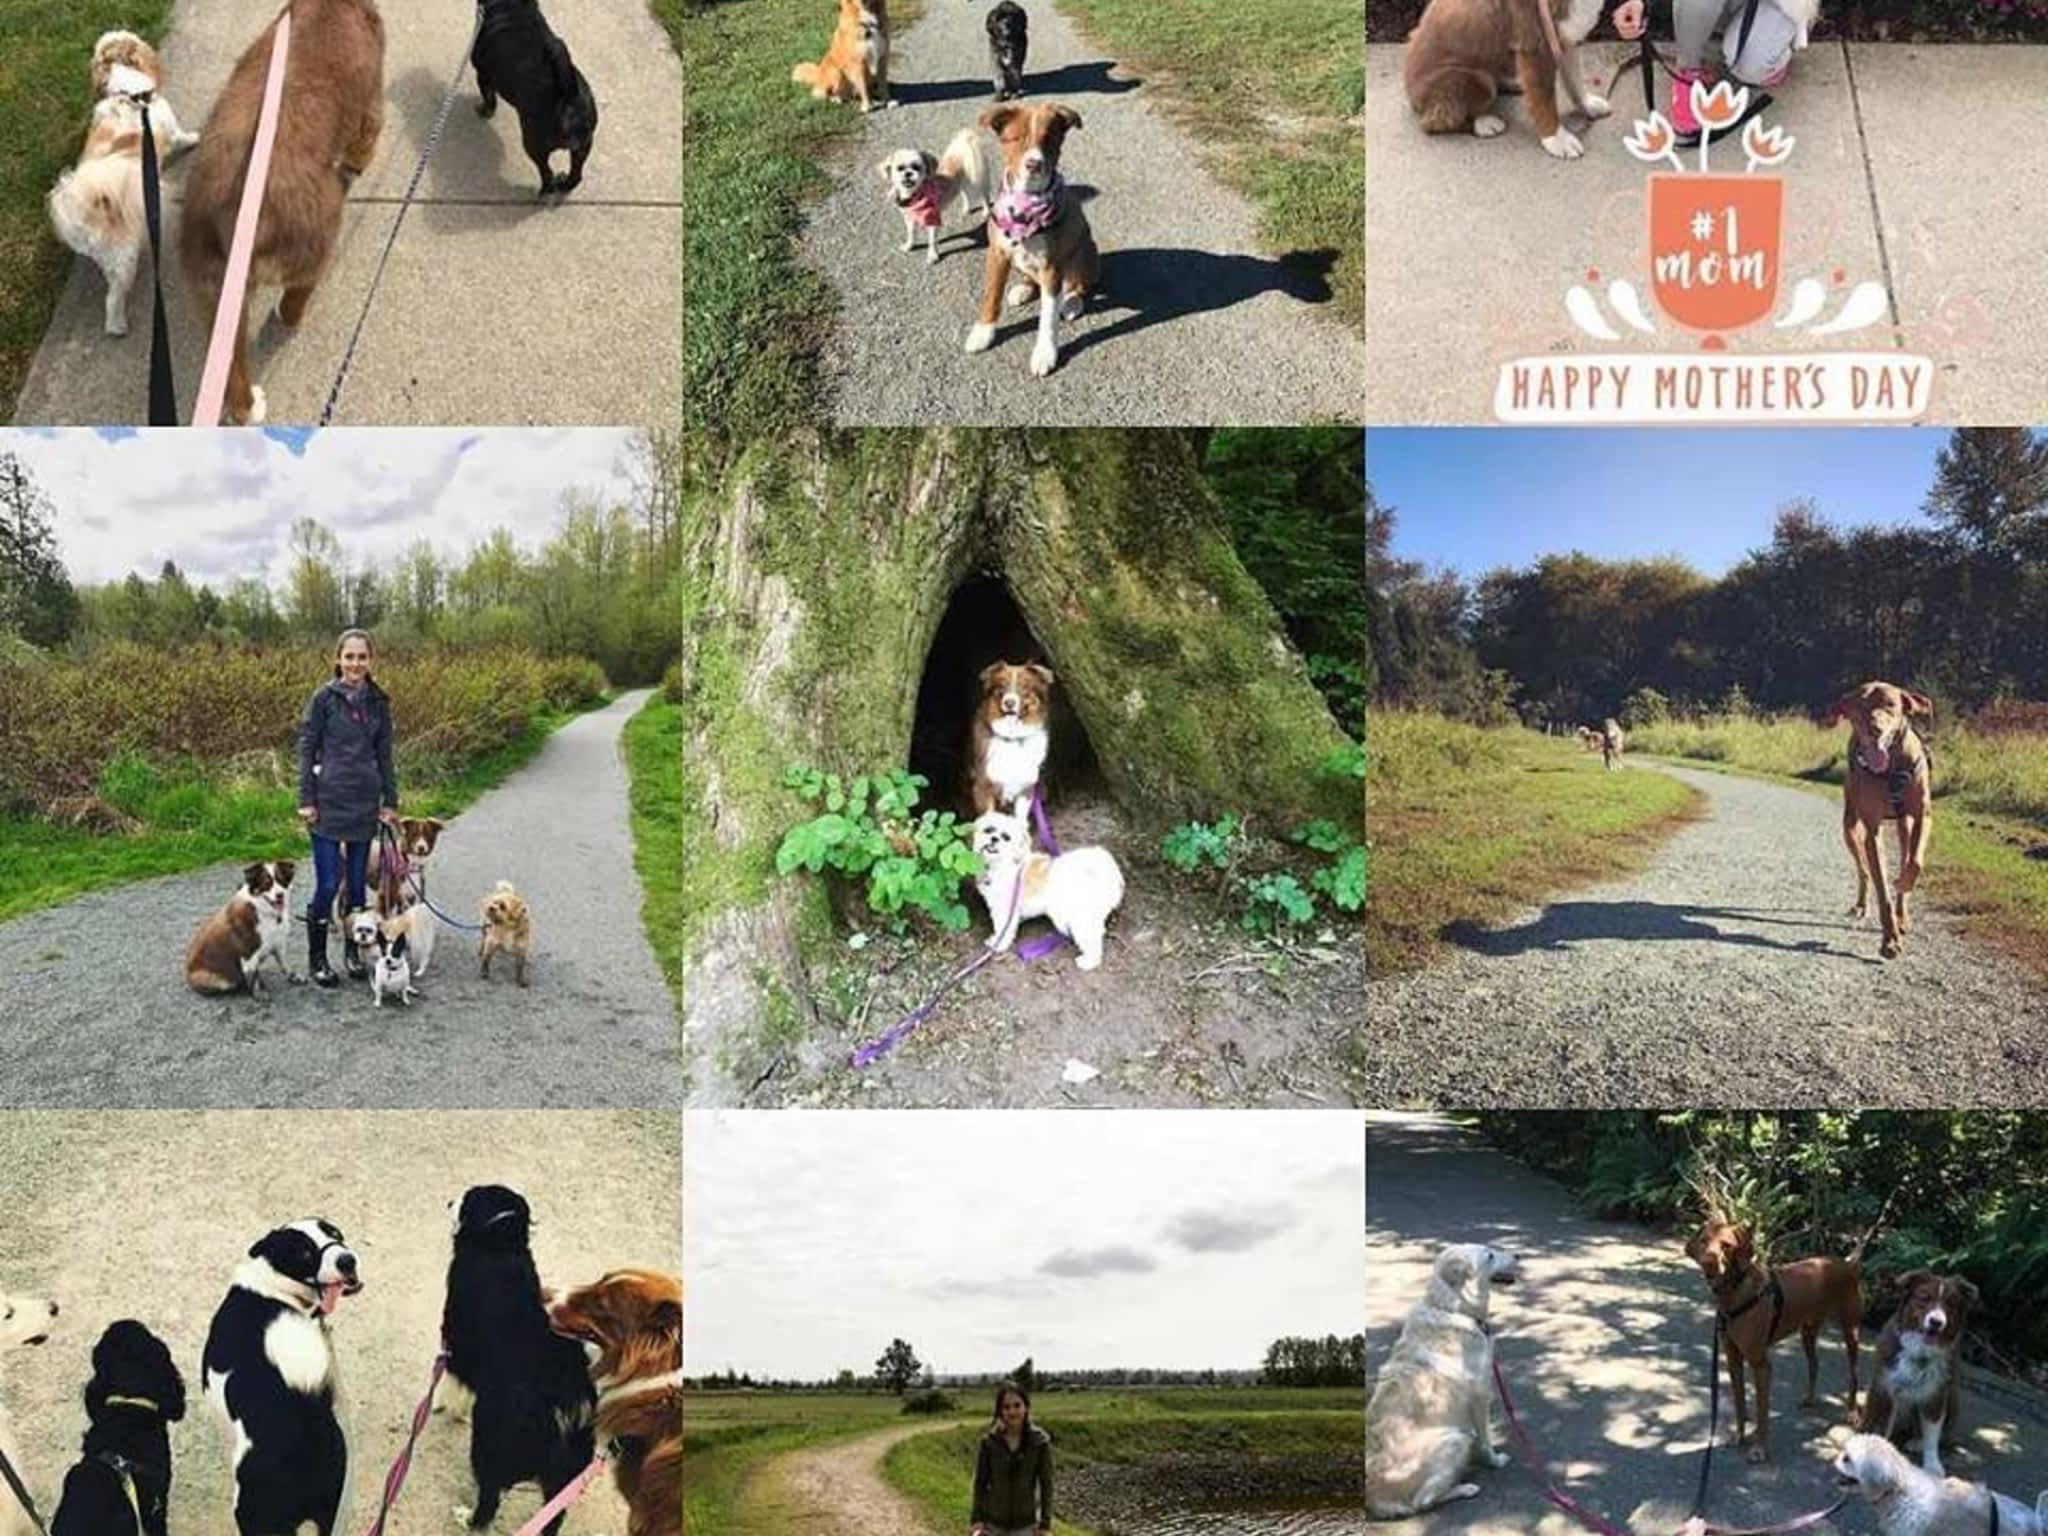 photo Busy Paws Dog Walking and Pet Care